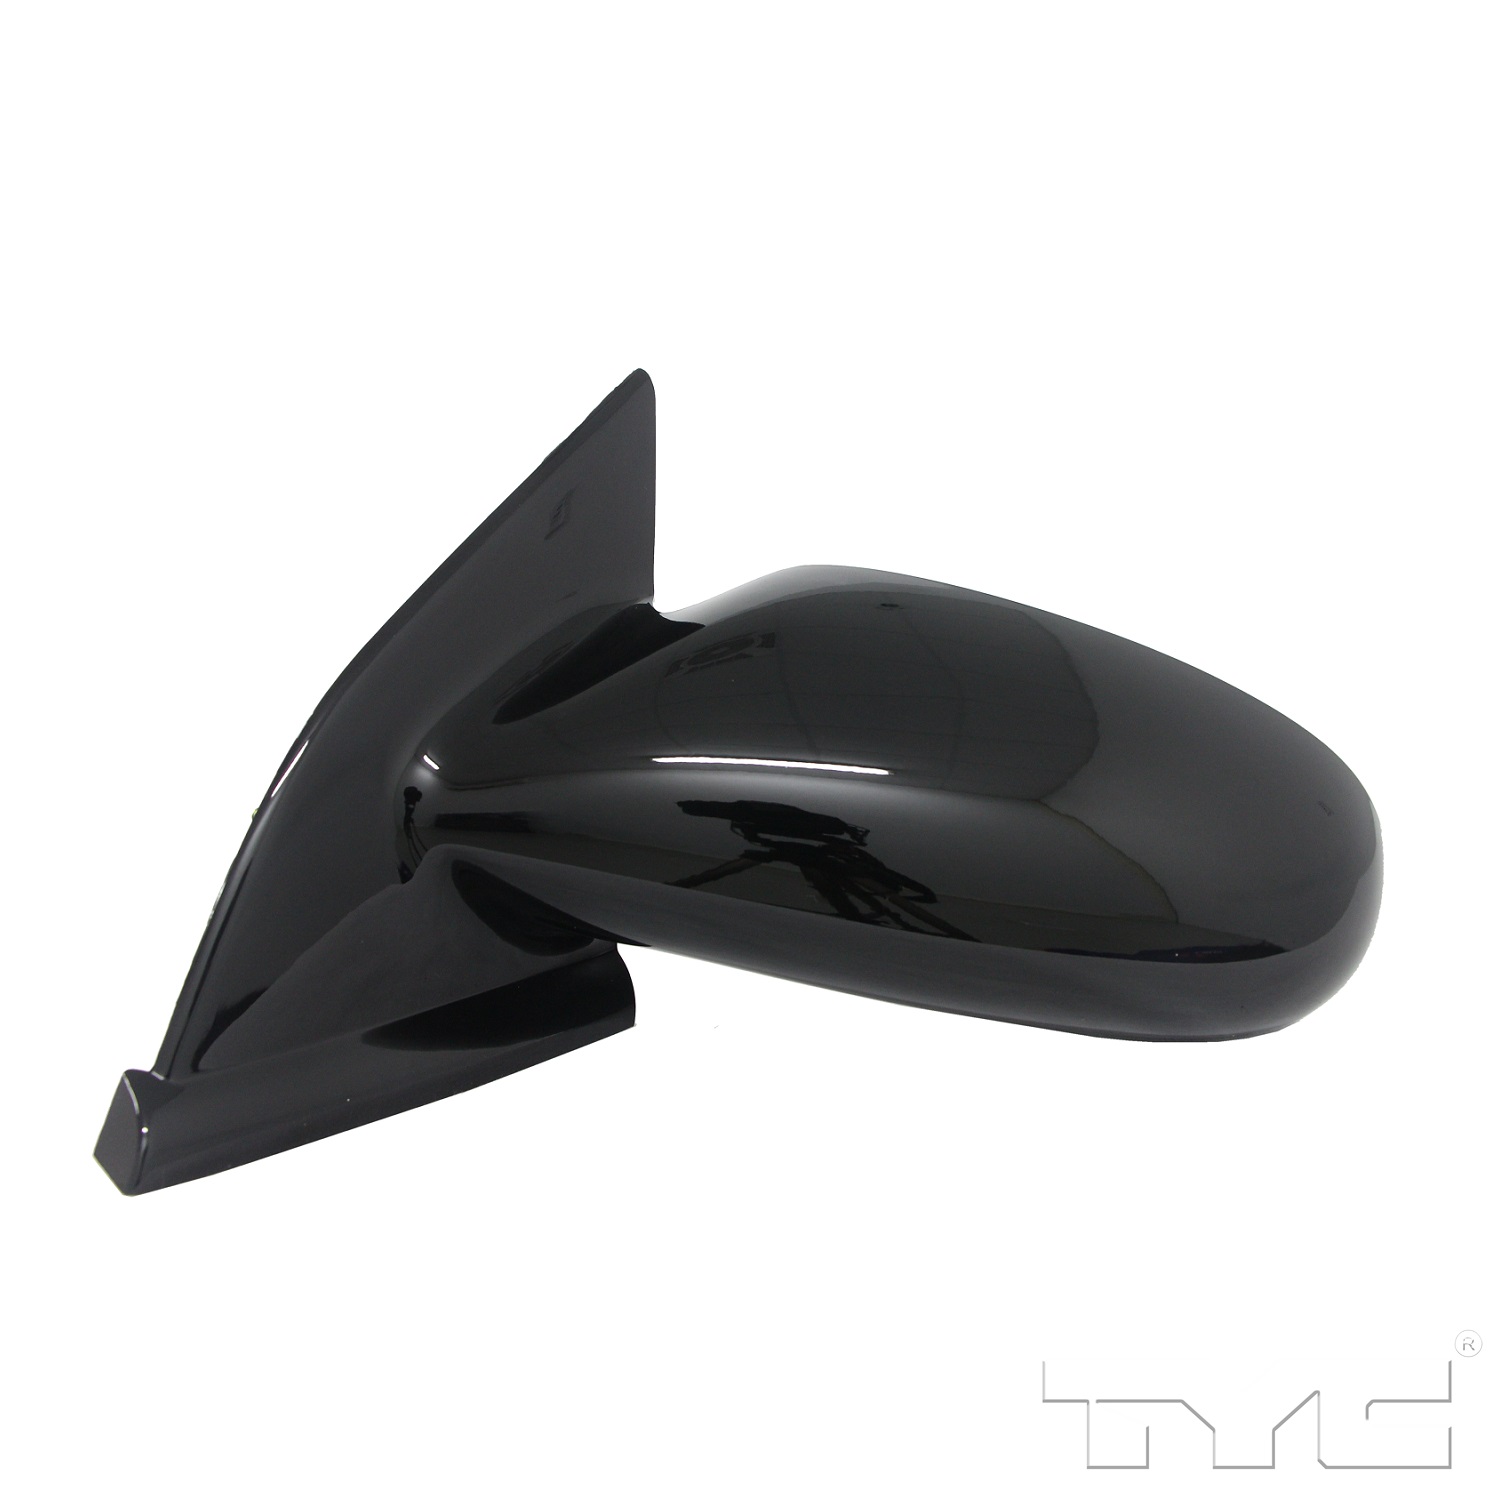 Aftermarket MIRRORS for SATURN - SW1, SW1,96-99,LT Mirror outside rear view